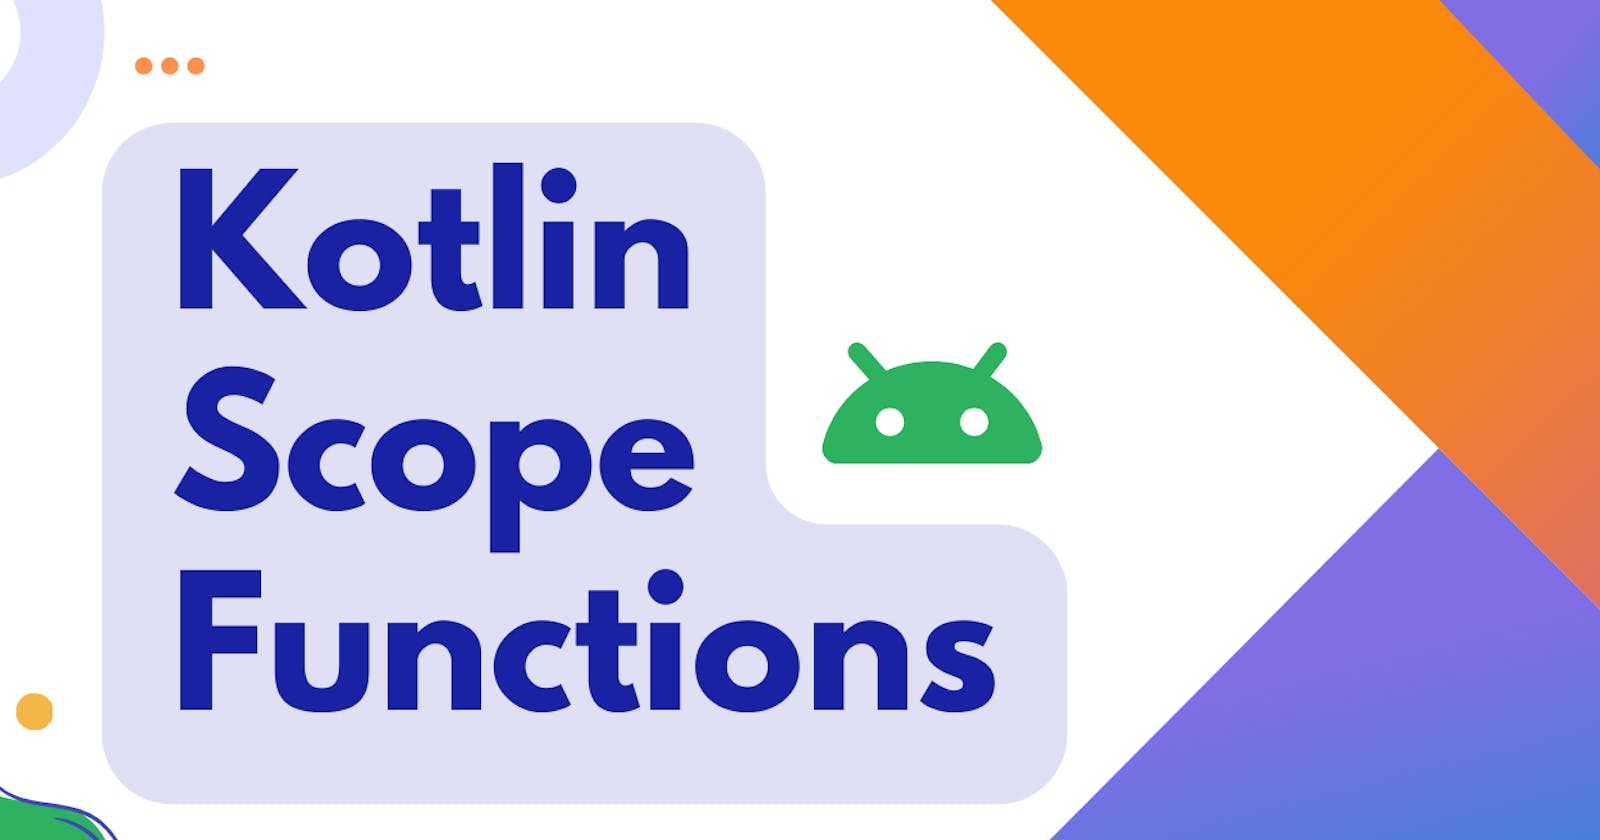 A Deep Dive into Kotlin's Scope Functions